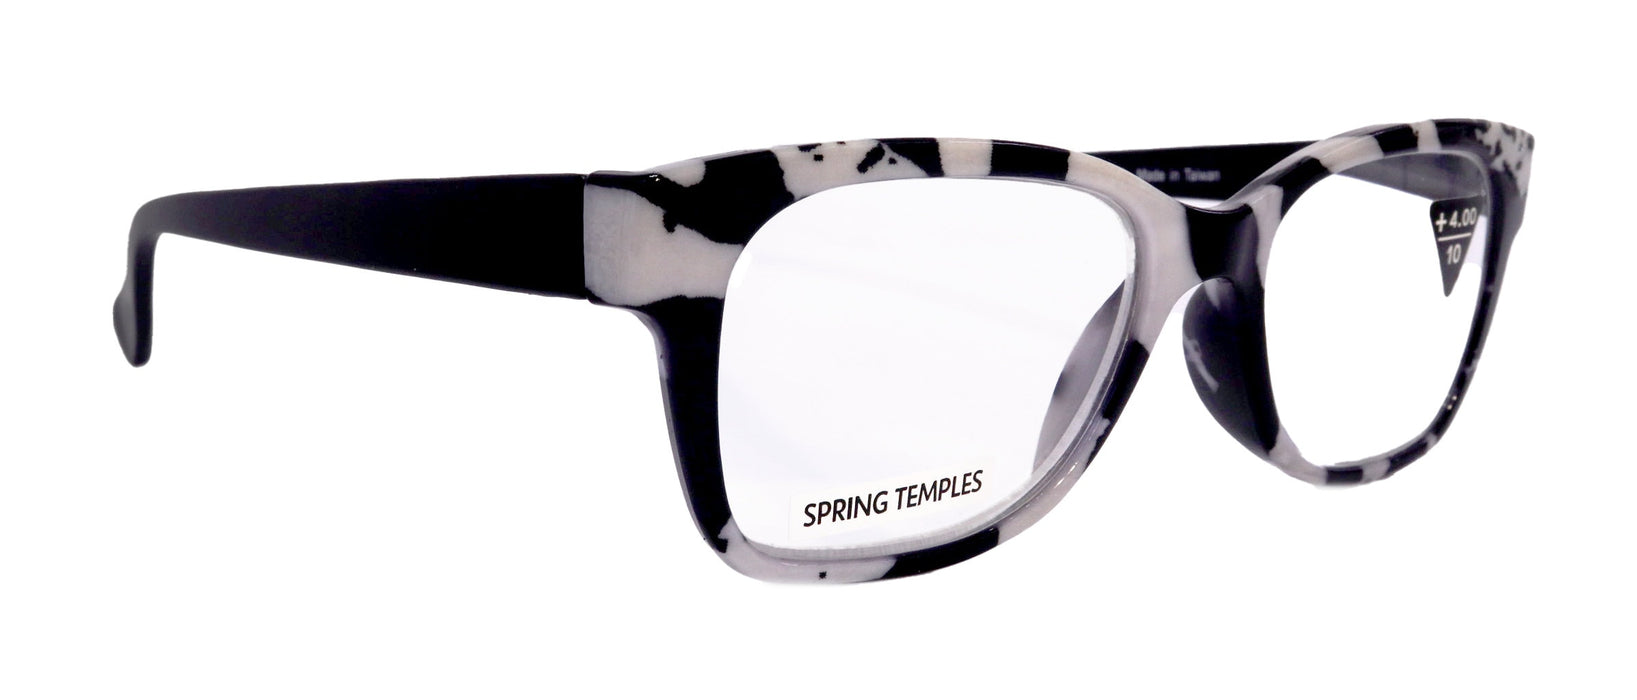 Premium Reading Glasses High End Reading Glass +1.25 to +4 magnifying glasses, Square. optical Frames